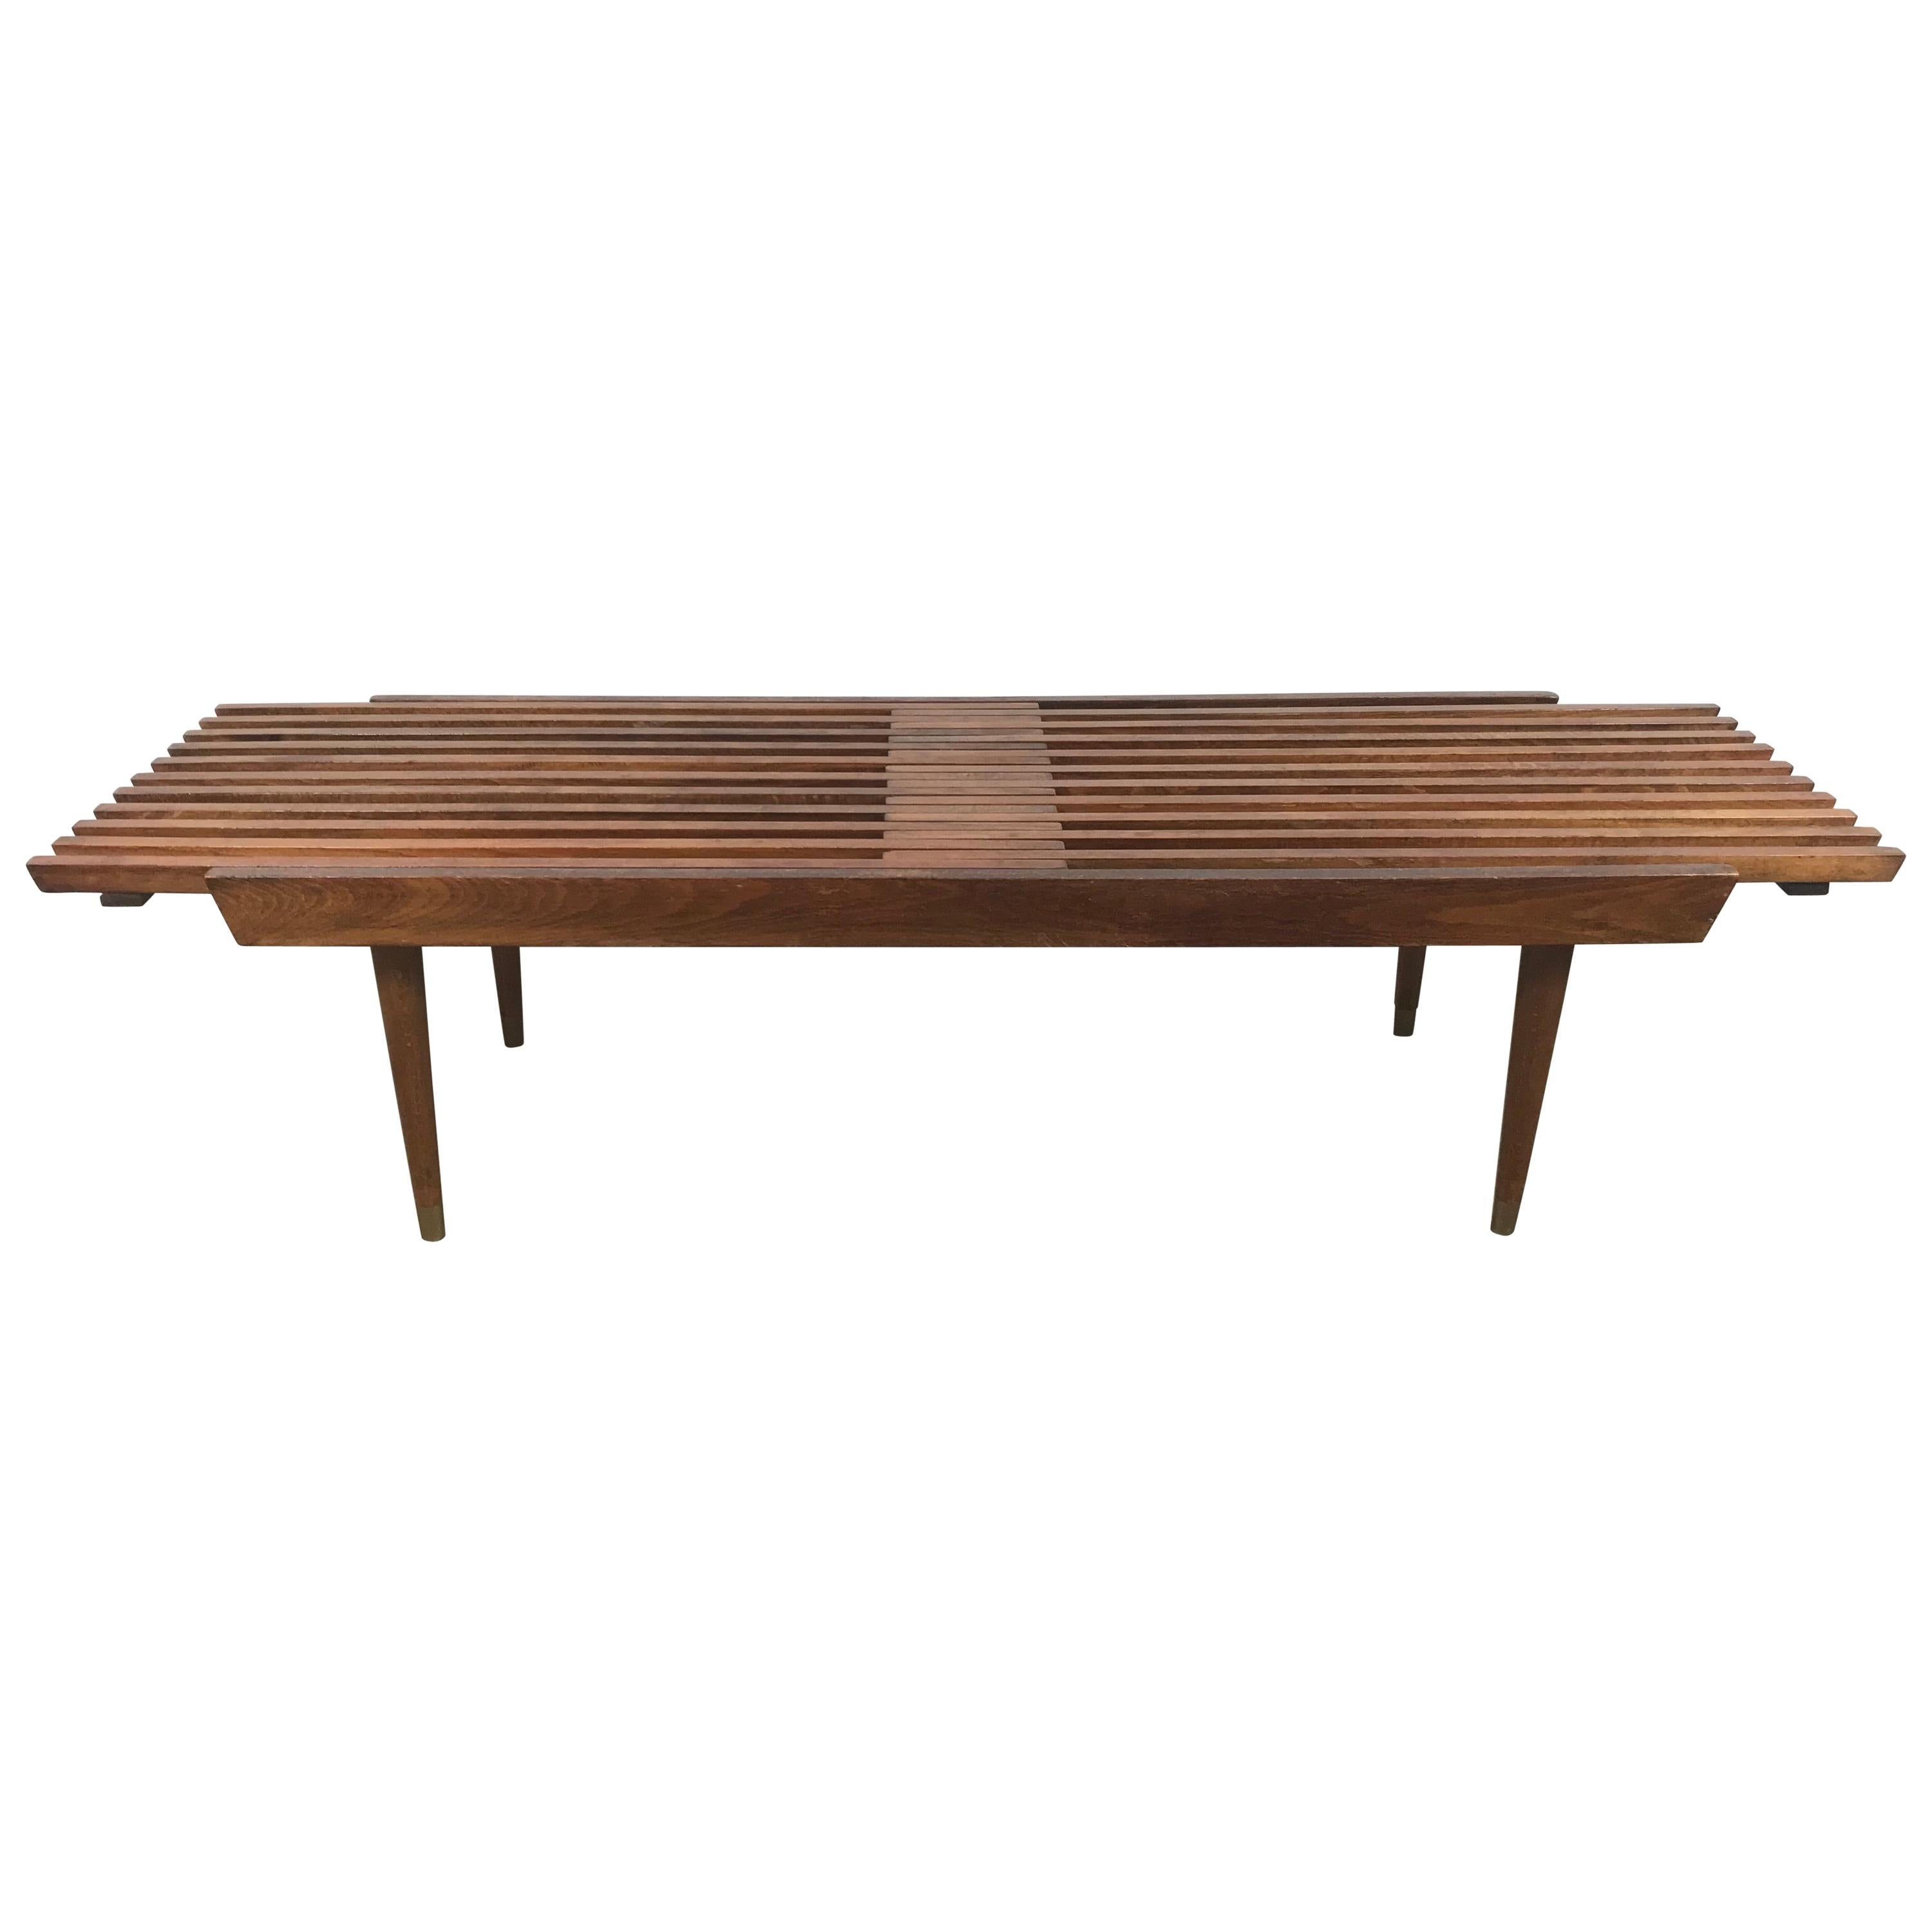 Classic Mid-Century Modern Walnut Expandable Slat Bench or Table